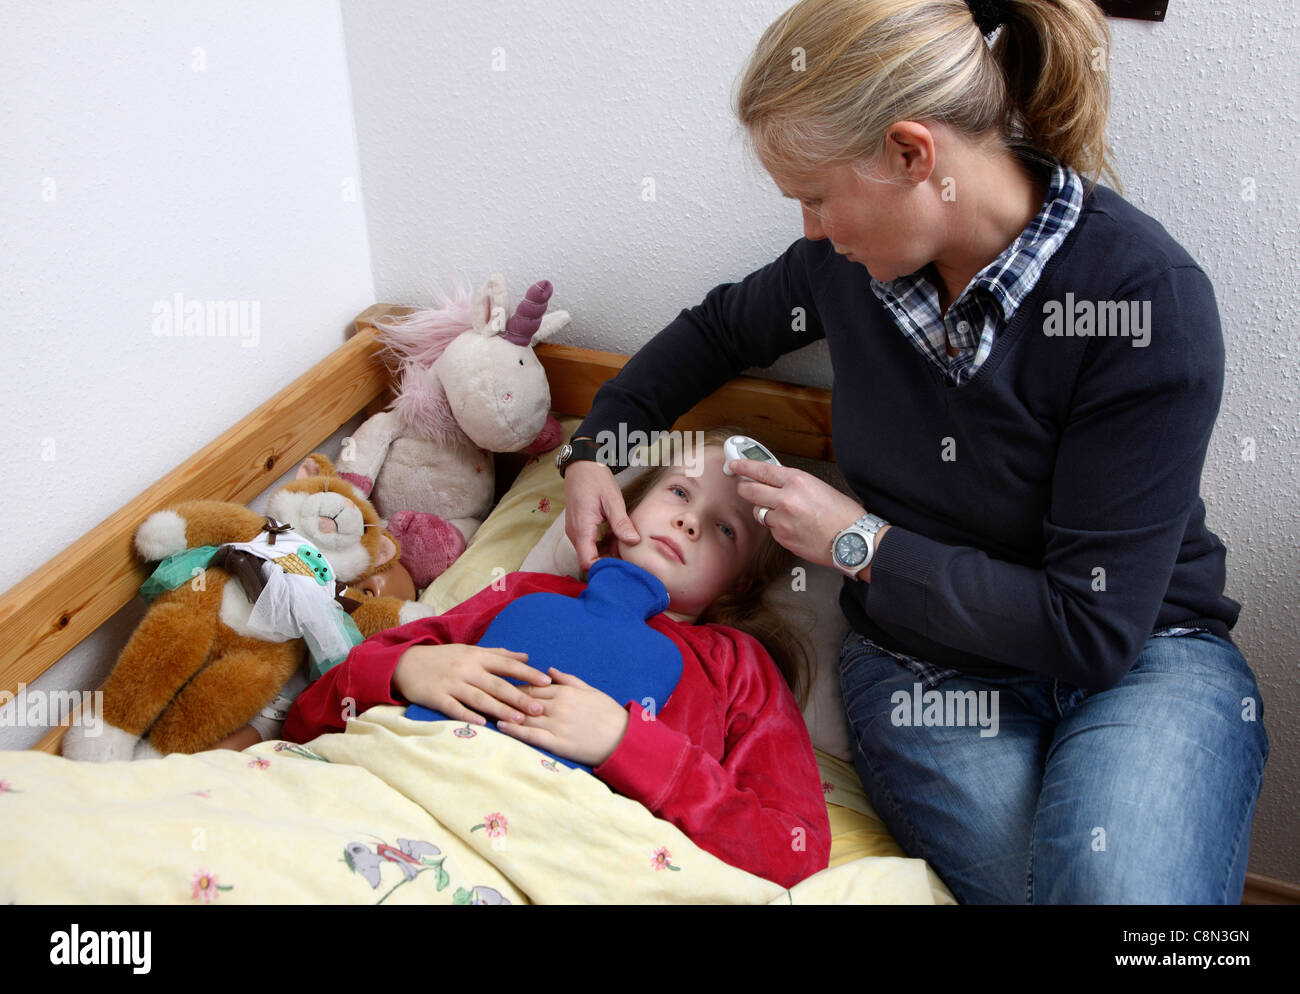 Young girl, 10 years old, is sick in bed, gets help and care from her mother. Stock Photo